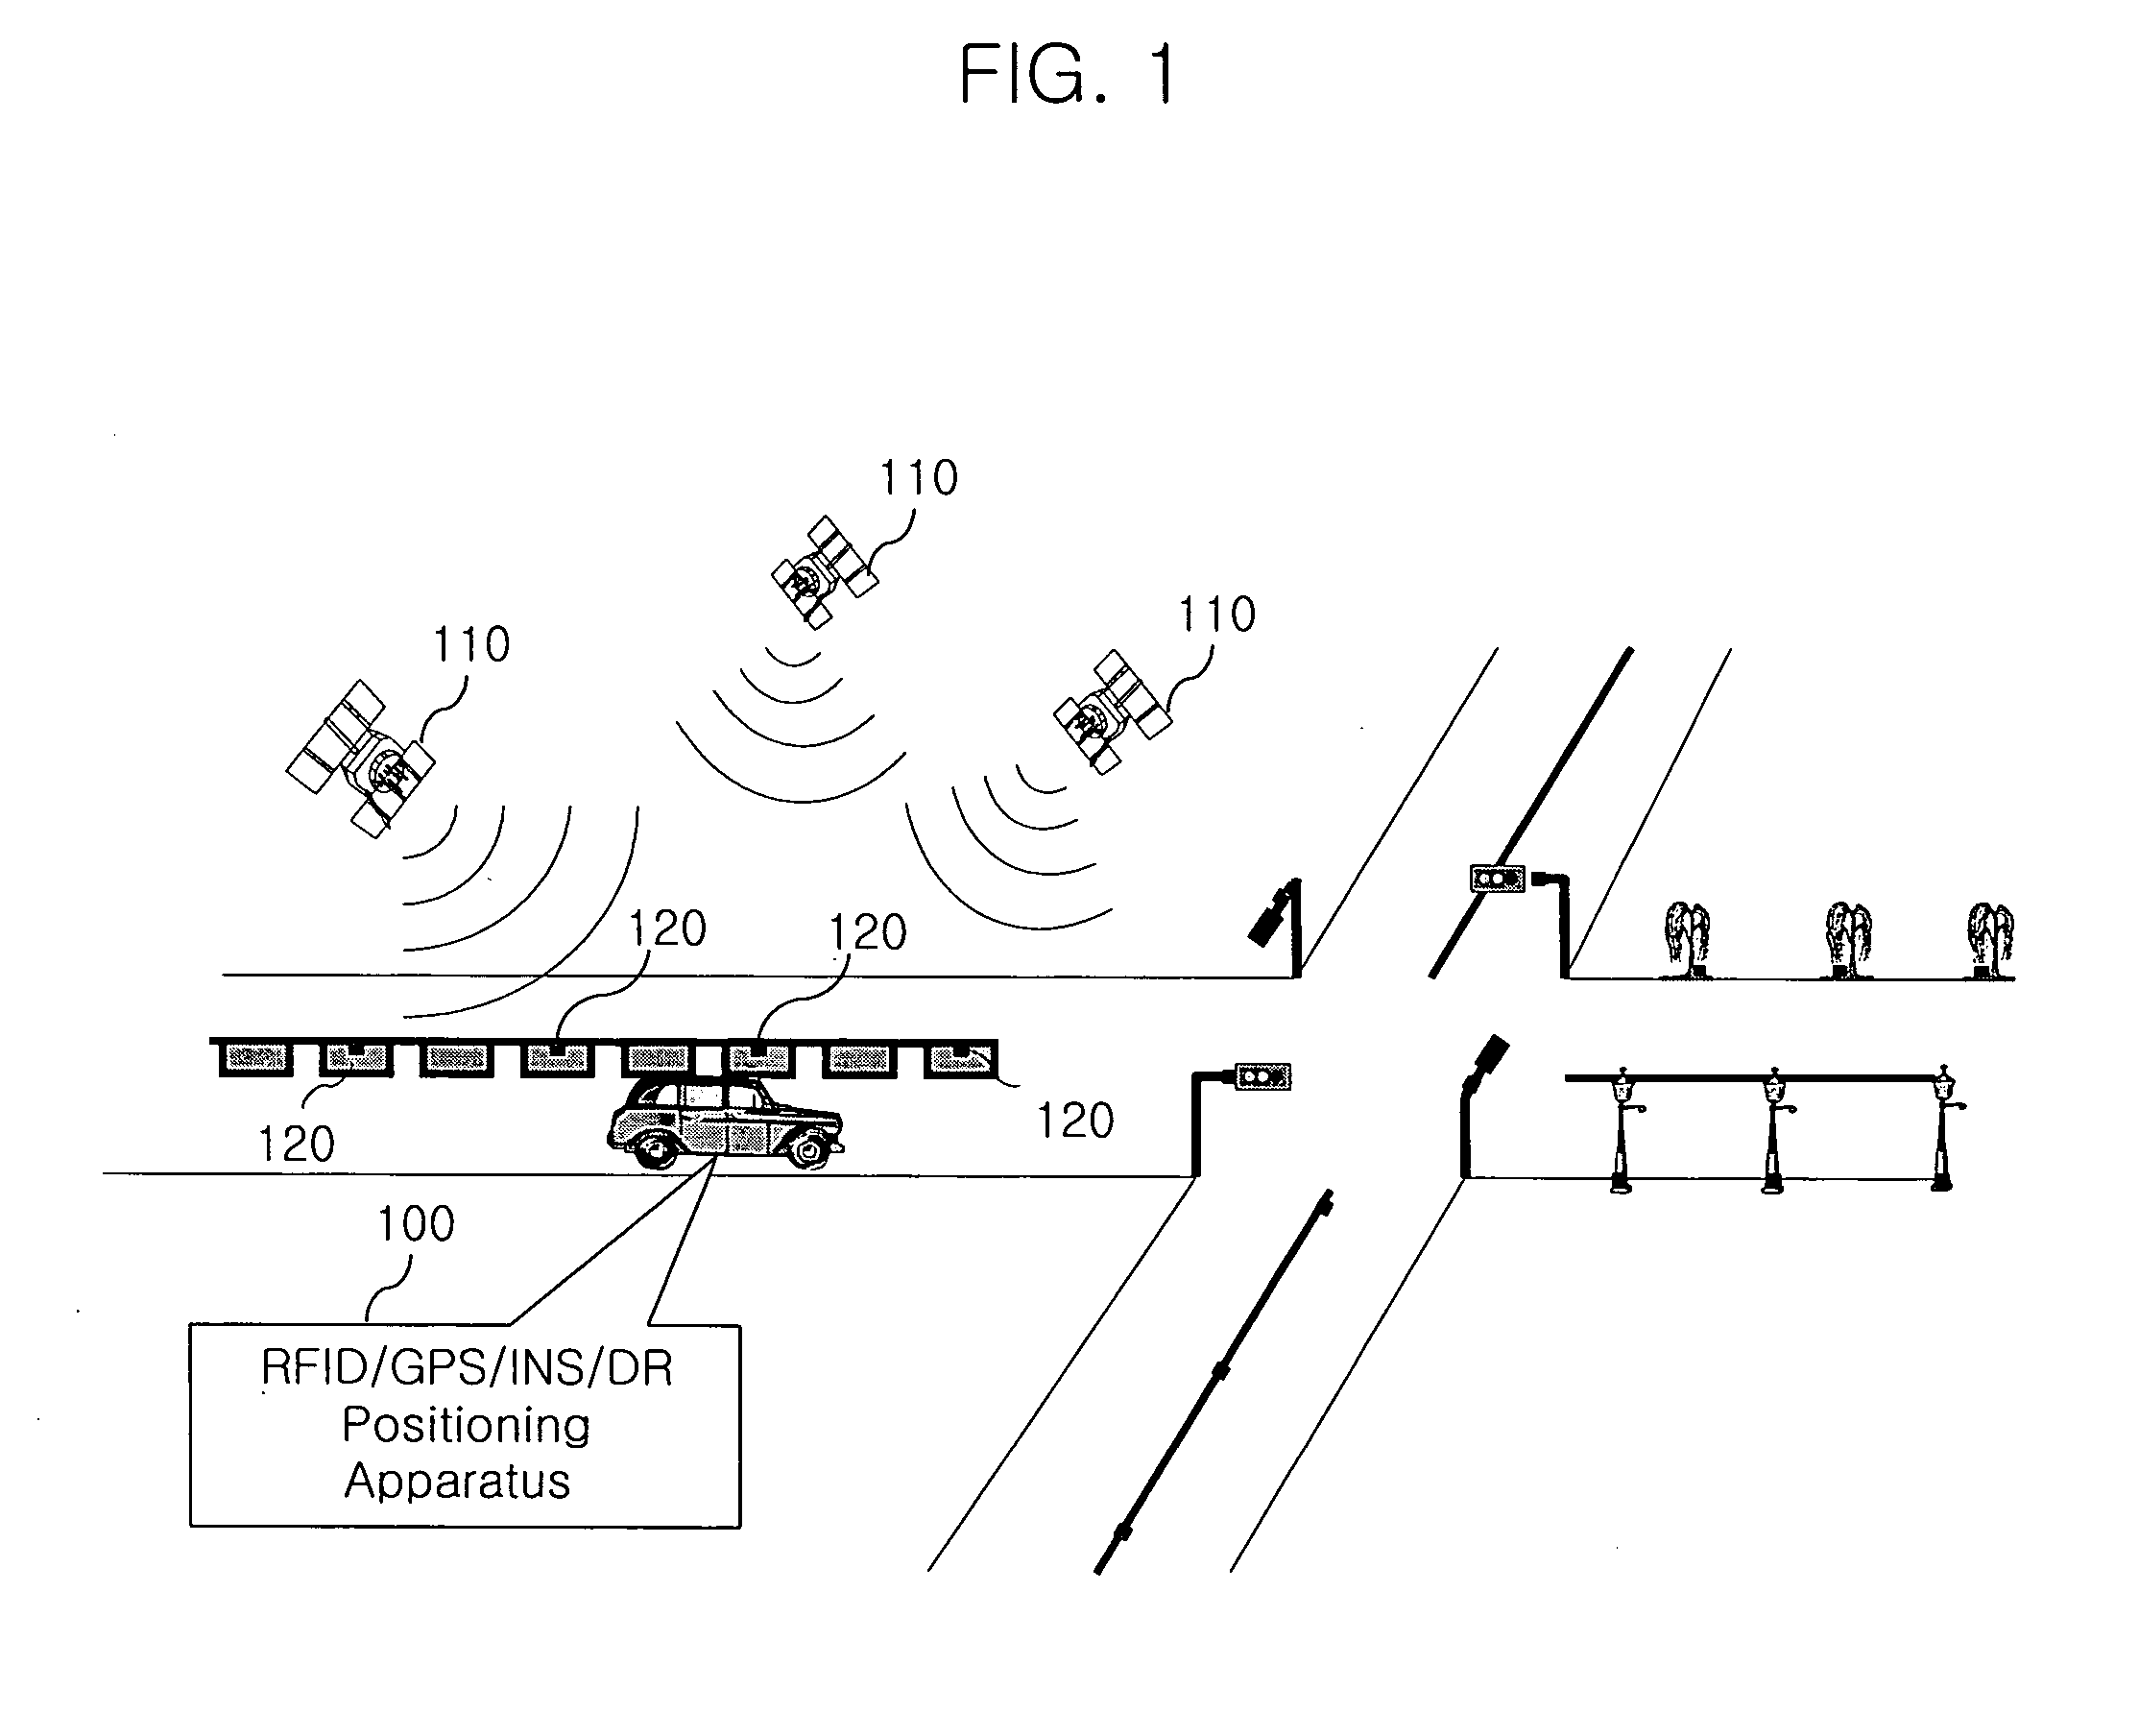 Positioning apparatus and method combining RFID, GPS and INS